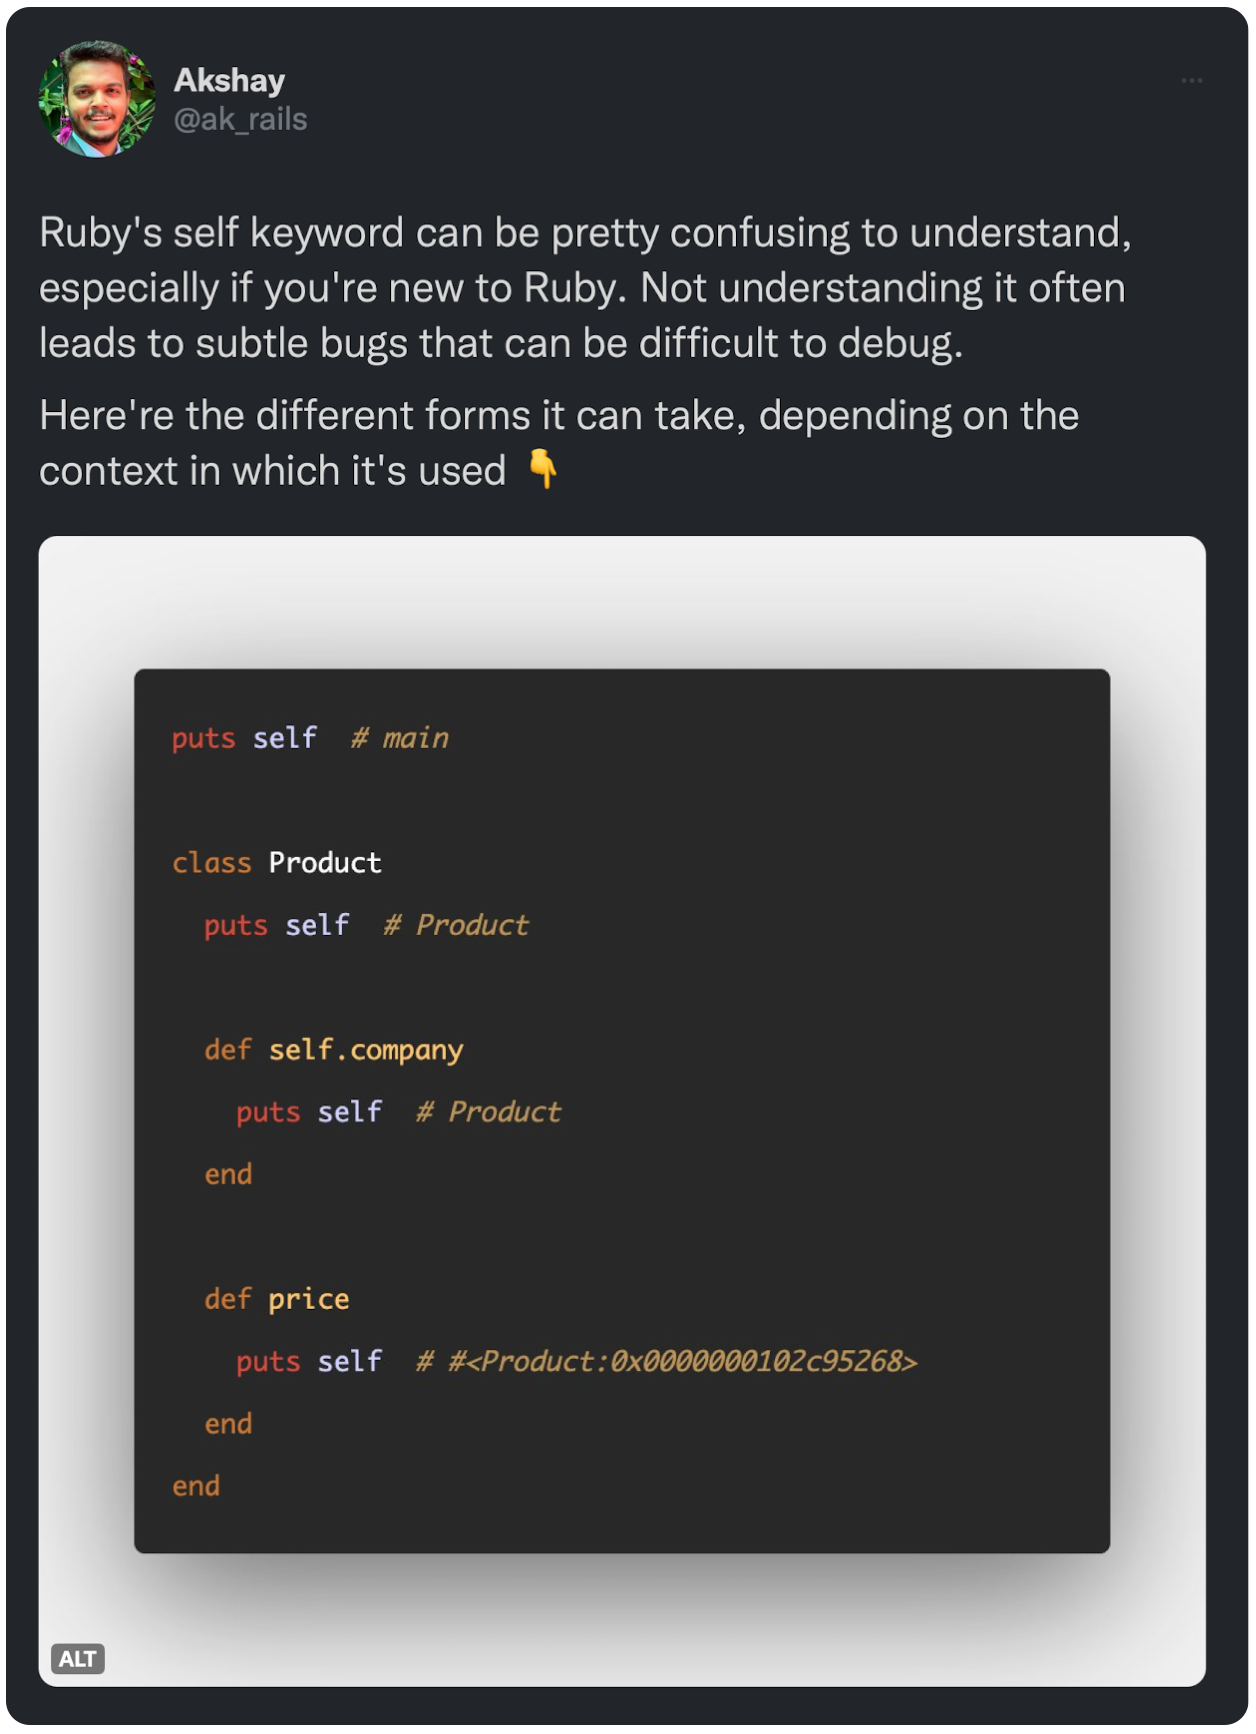 Ruby's self keyword can be pretty confusing to understand, especially if you're new to Ruby. Not understanding it often leads to subtle bugs that can be difficult to debug. Here're the different forms it can take, depending on the context in which it's used 👇